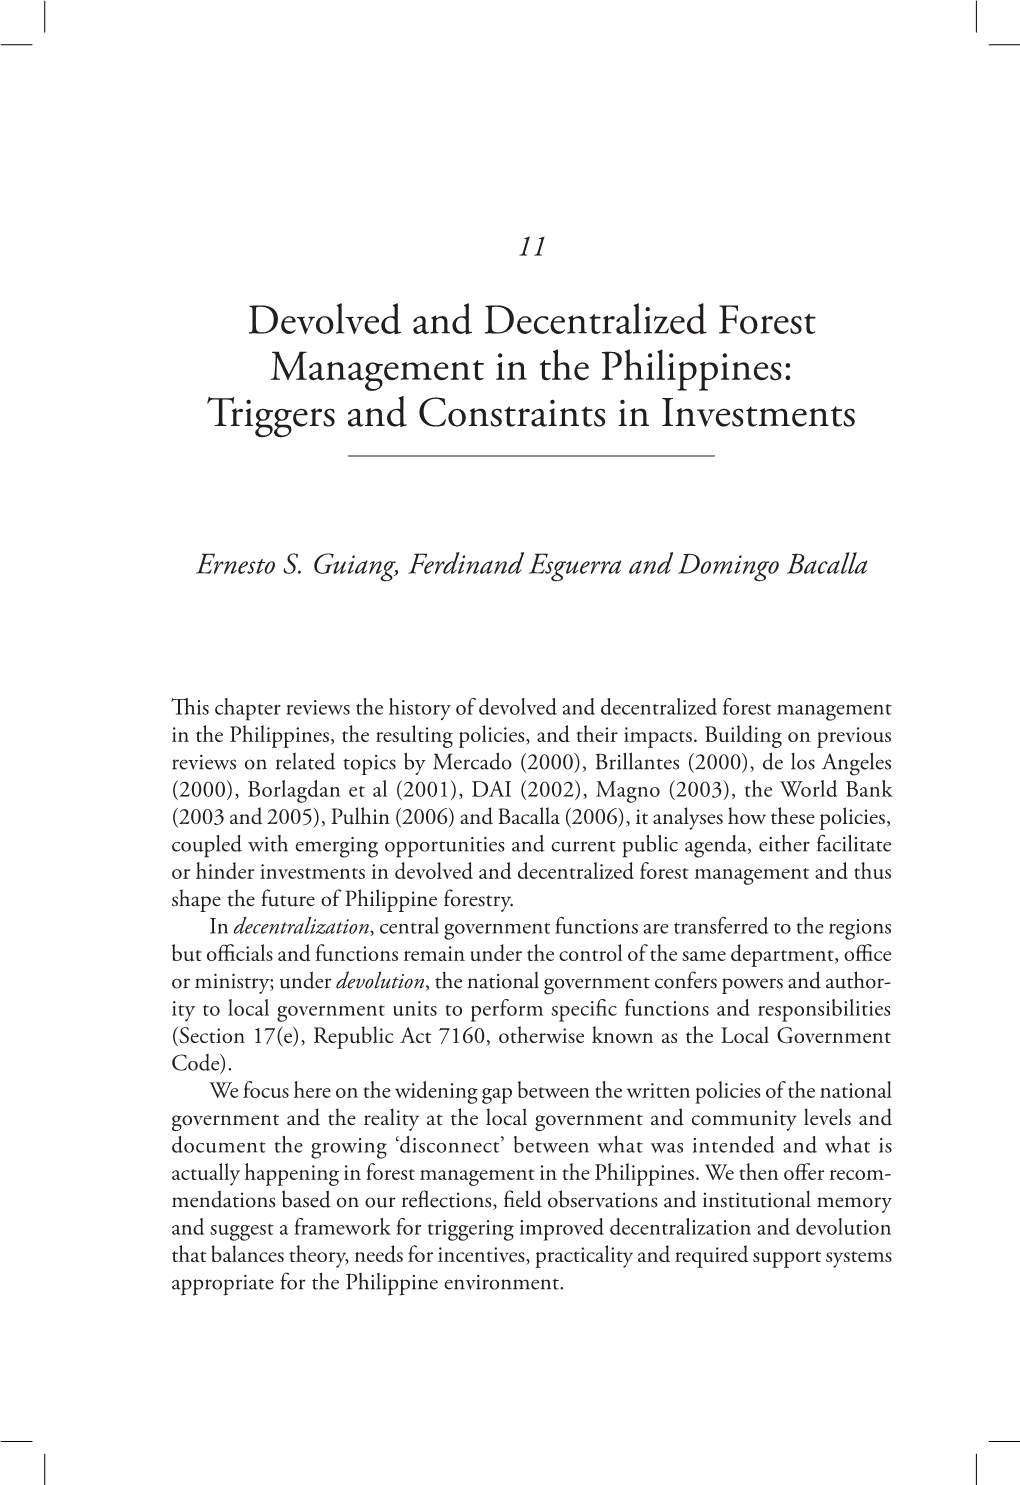 Devolved and Decentralized Forest Management in the Philippines: Triggers and Constraints in Investments